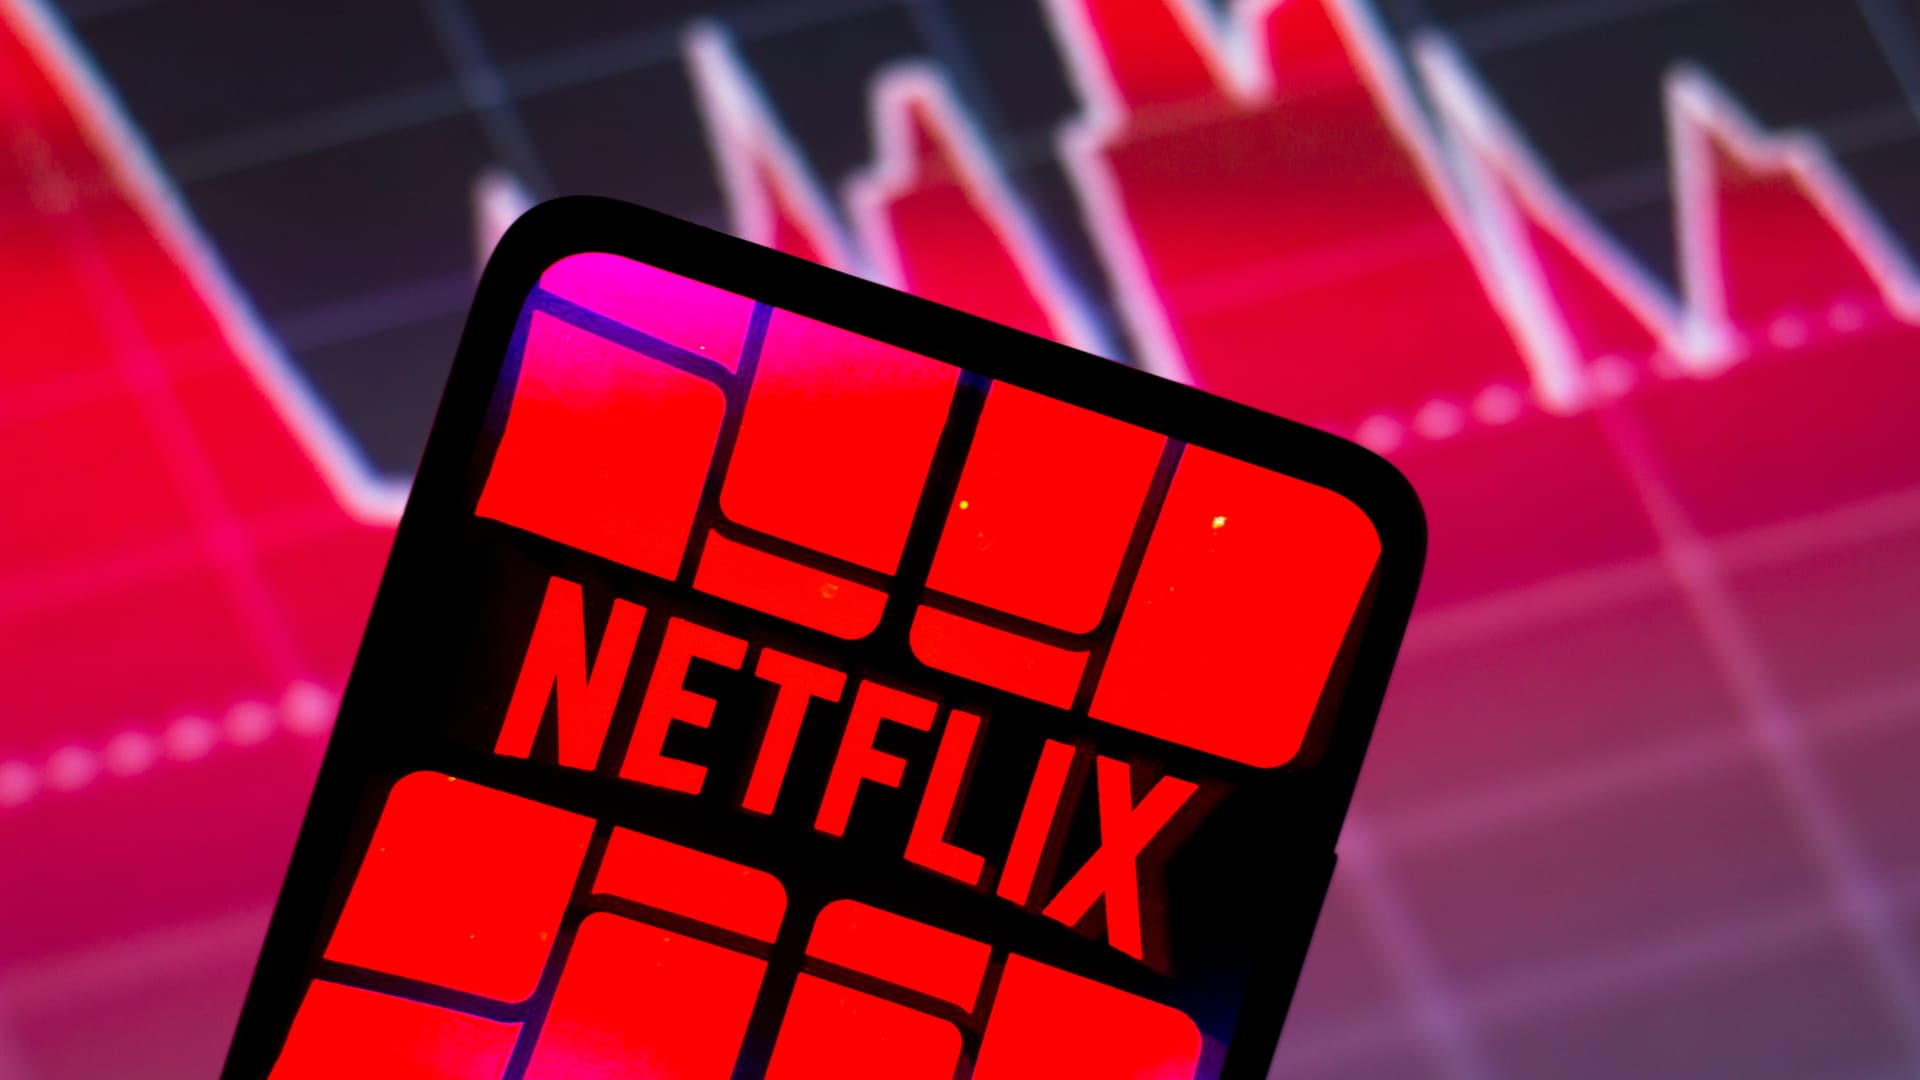 Stocks making the biggest moves after hours: Netflix, United Airlines, Western Alliance, Interactive Brokers and more